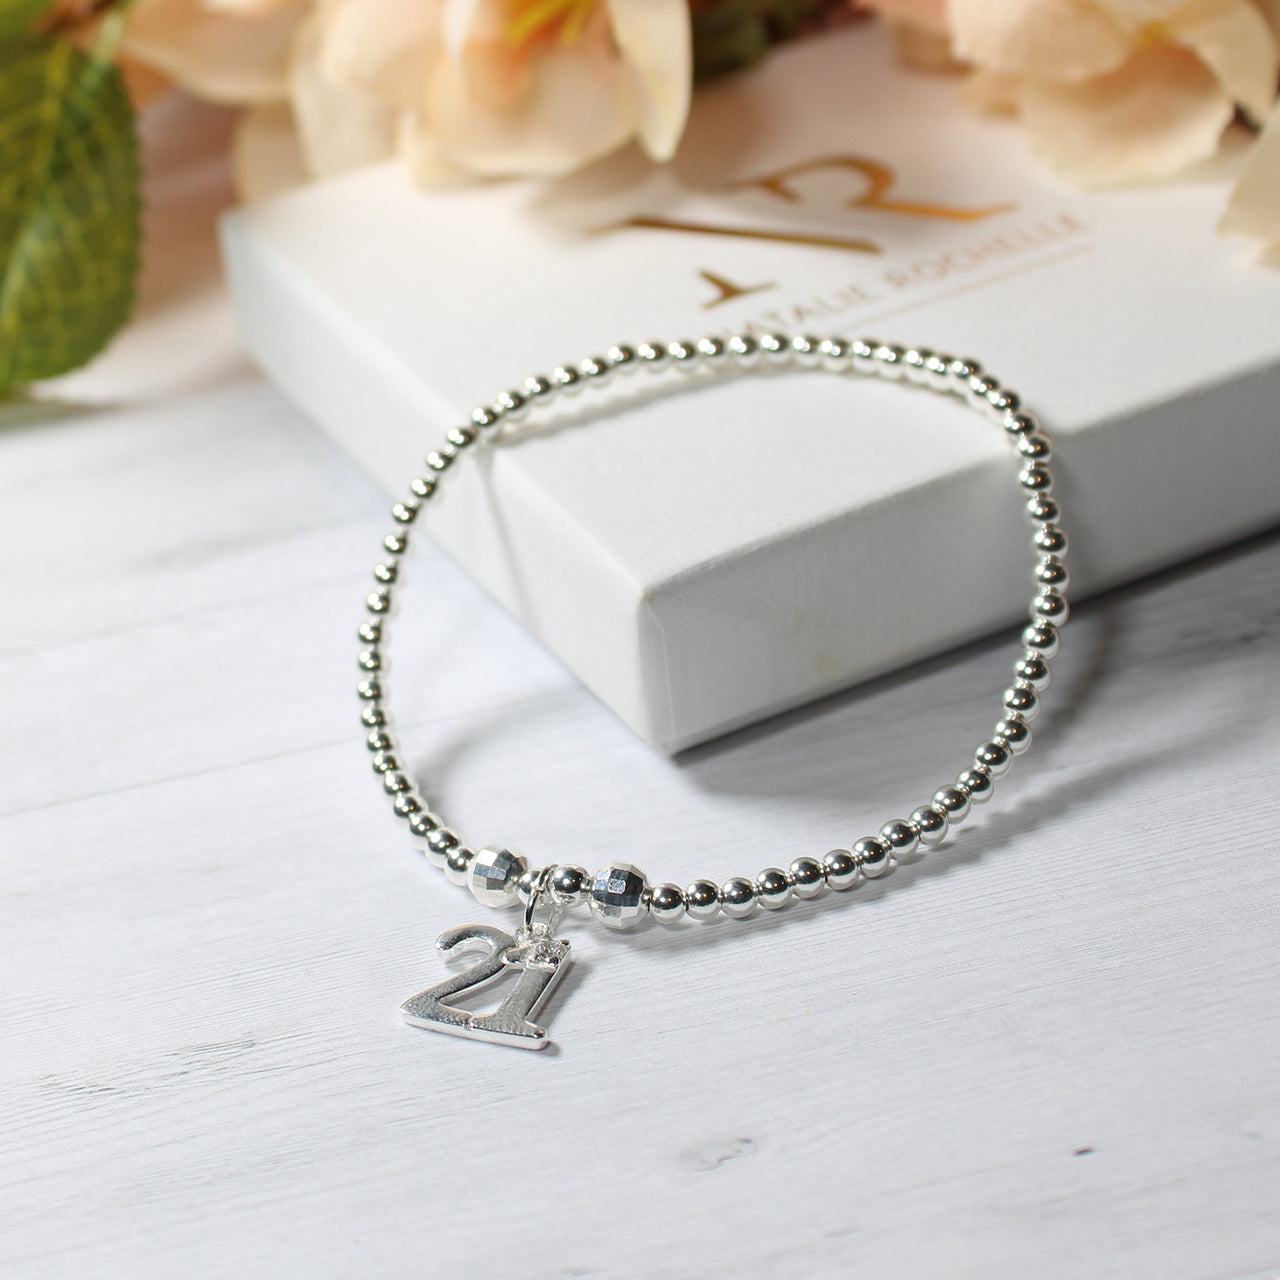 Buy Handmade Gift, 21st Birthday Gift for Her, Personalized Jewelry, Mother  Daughter, Personalized Bracelet, Handmade Jewelry, Charm Bracelet Online in  India - Etsy